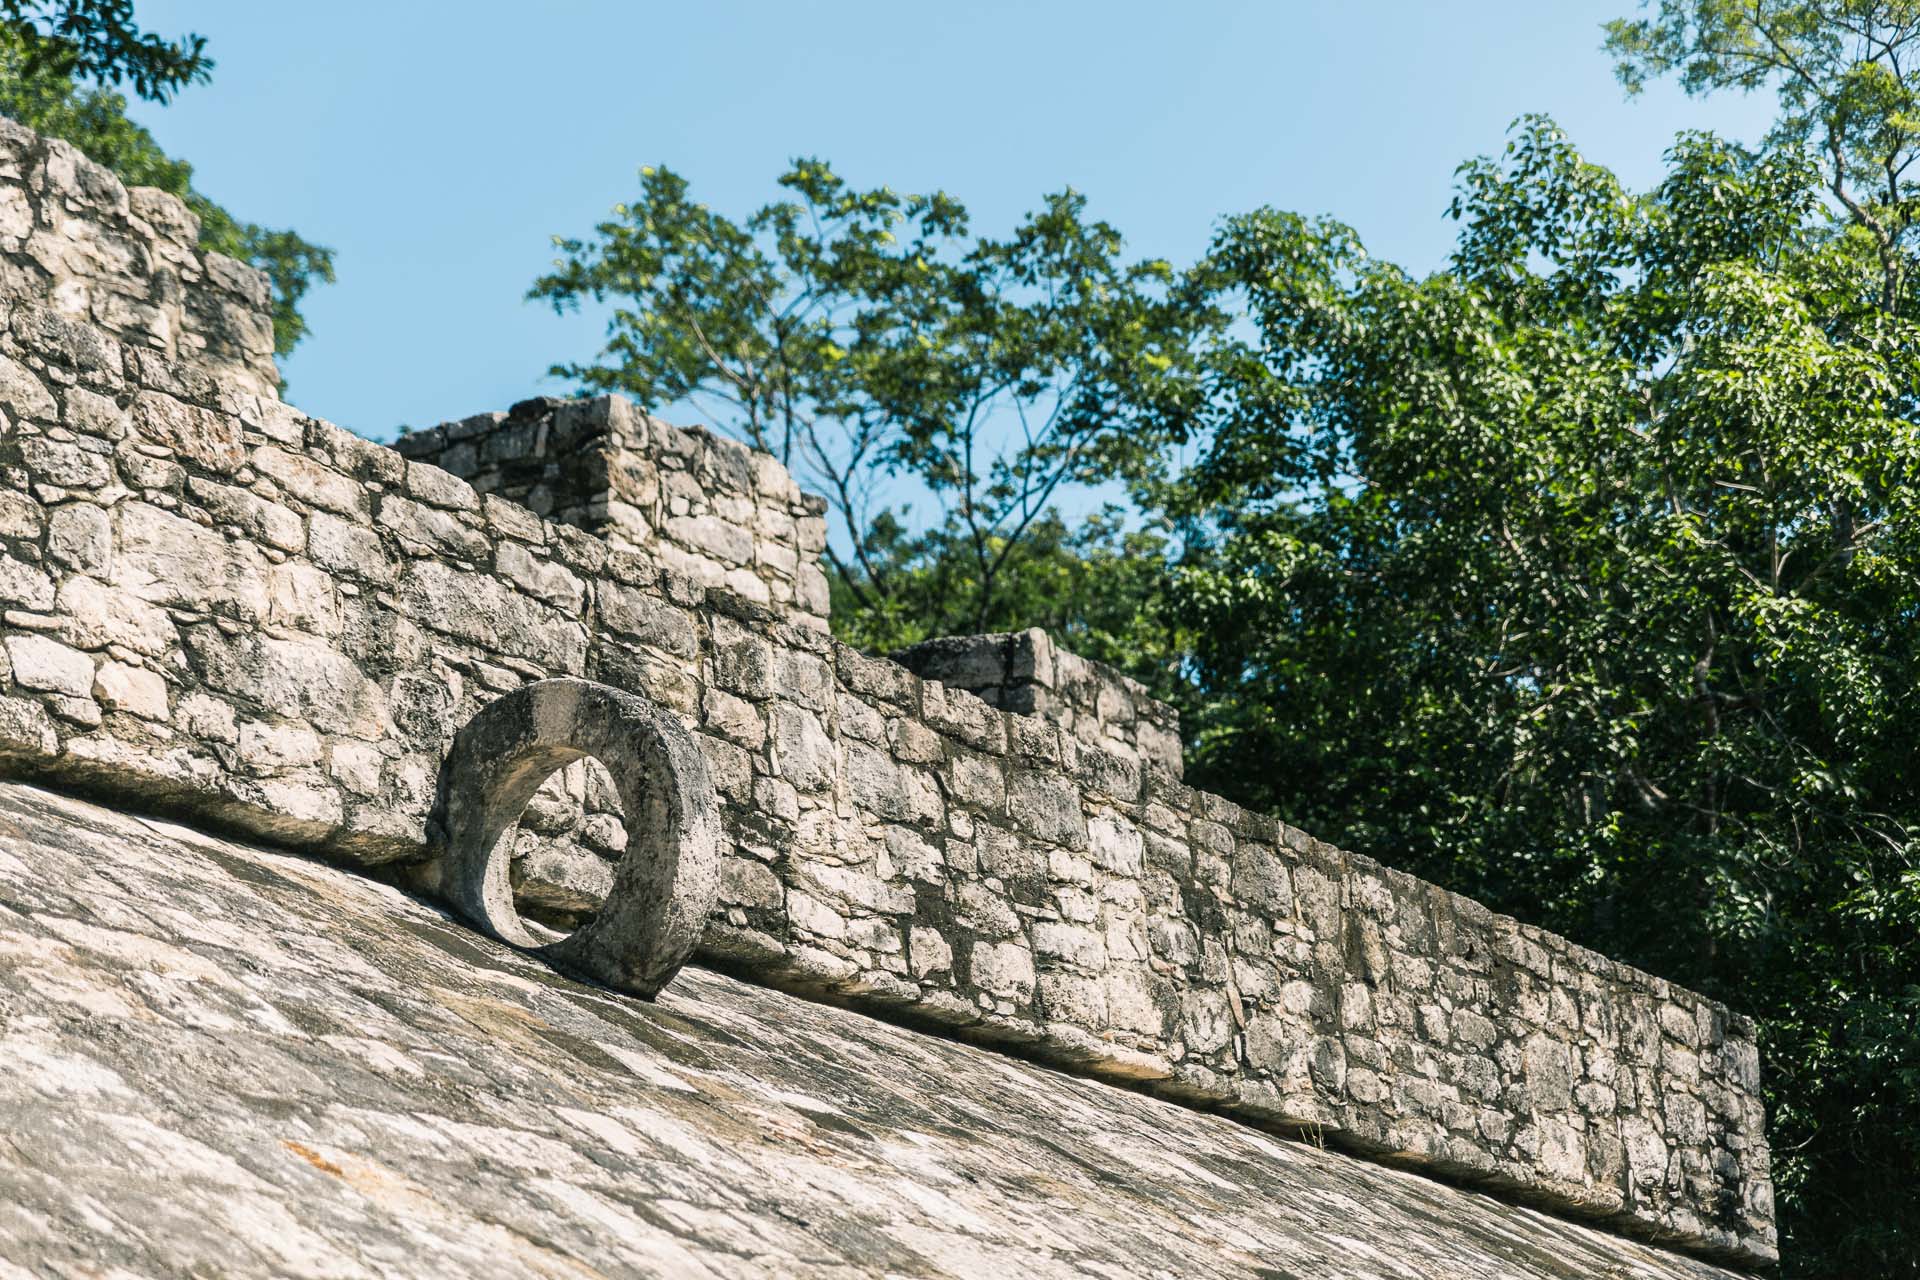 One of the goals at the Mayan ball court. 